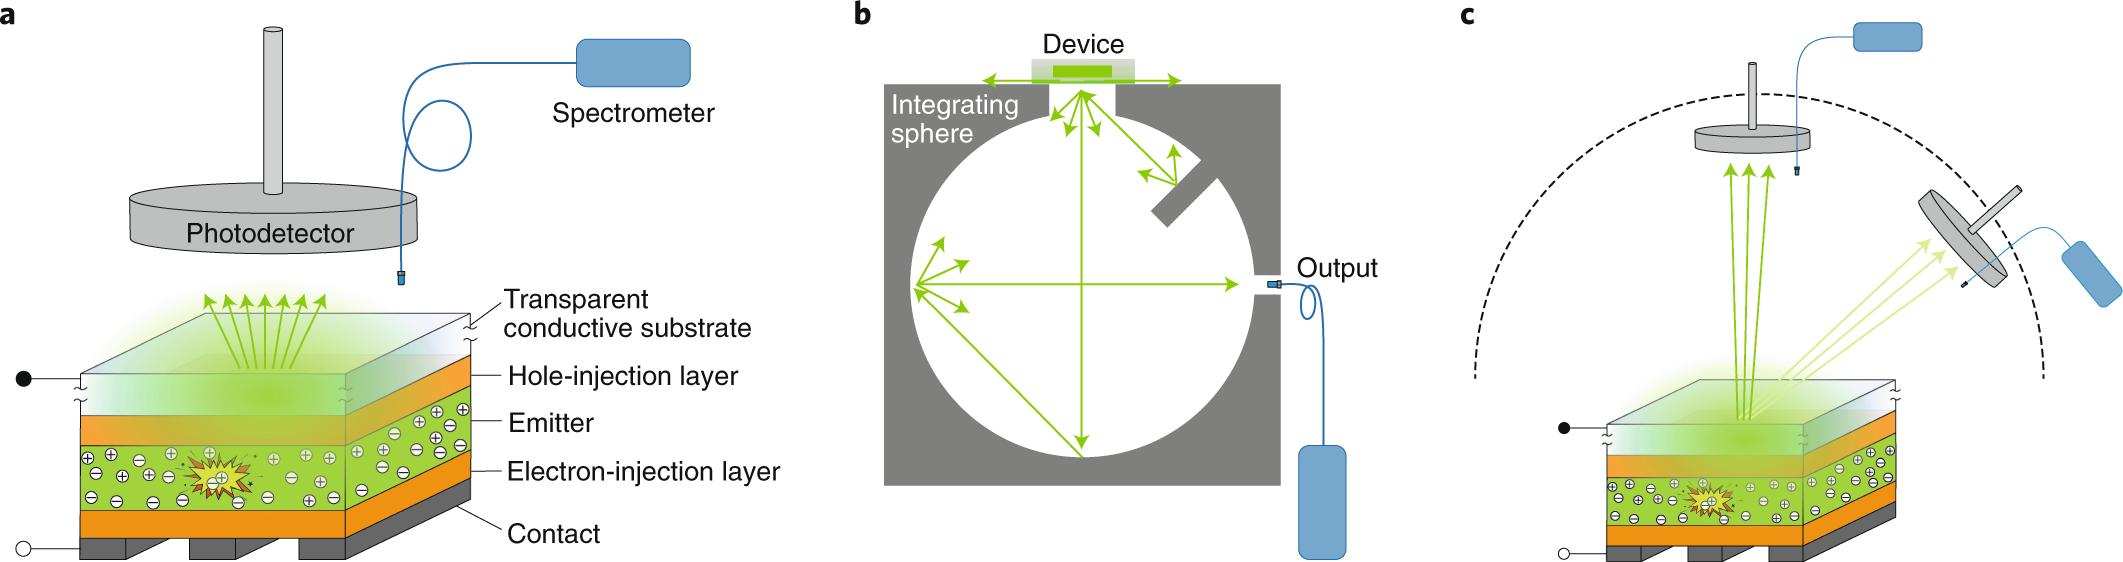 Best practices for measuring emerging light-emitting diode technologies |  Nature Photonics